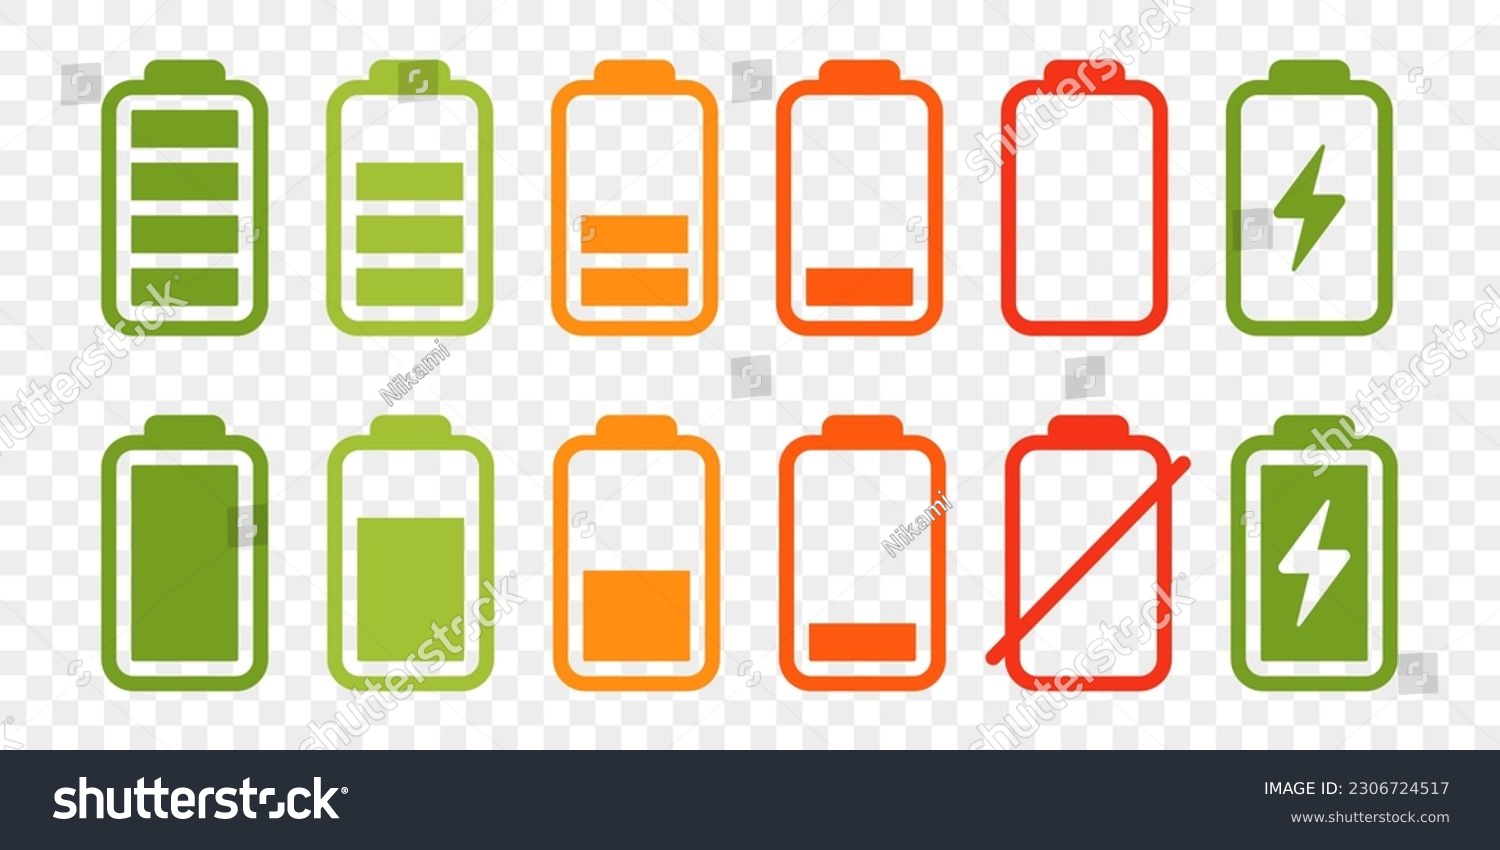 SVG of Battery icon set. High quality colorful style vector icons. Green 100% 75%, orange 50%, red 25% 0, batteries. Batery charge indicator. Baterry level, energy, full. Power low up status batteries logo. svg